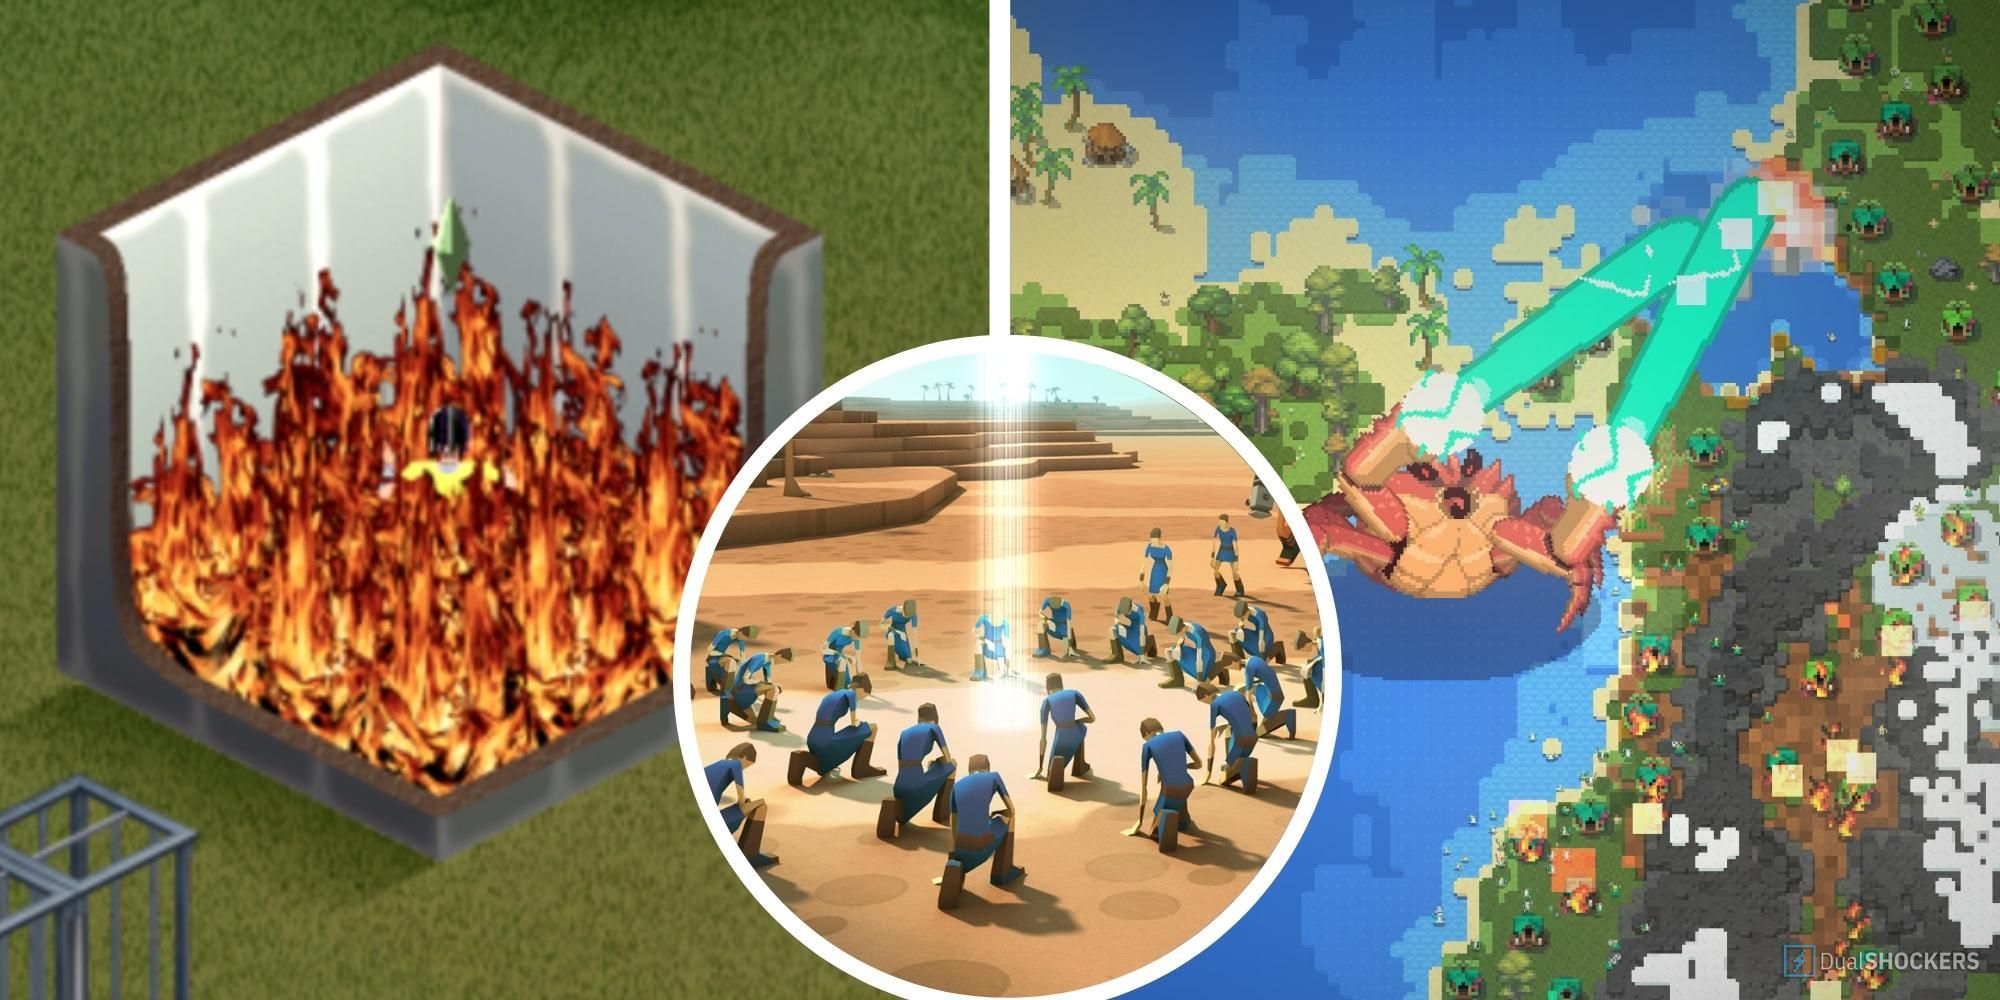 Left to right: Sim burning in a small house, villages kneeling around a beam of light, giant crab shooting lasers